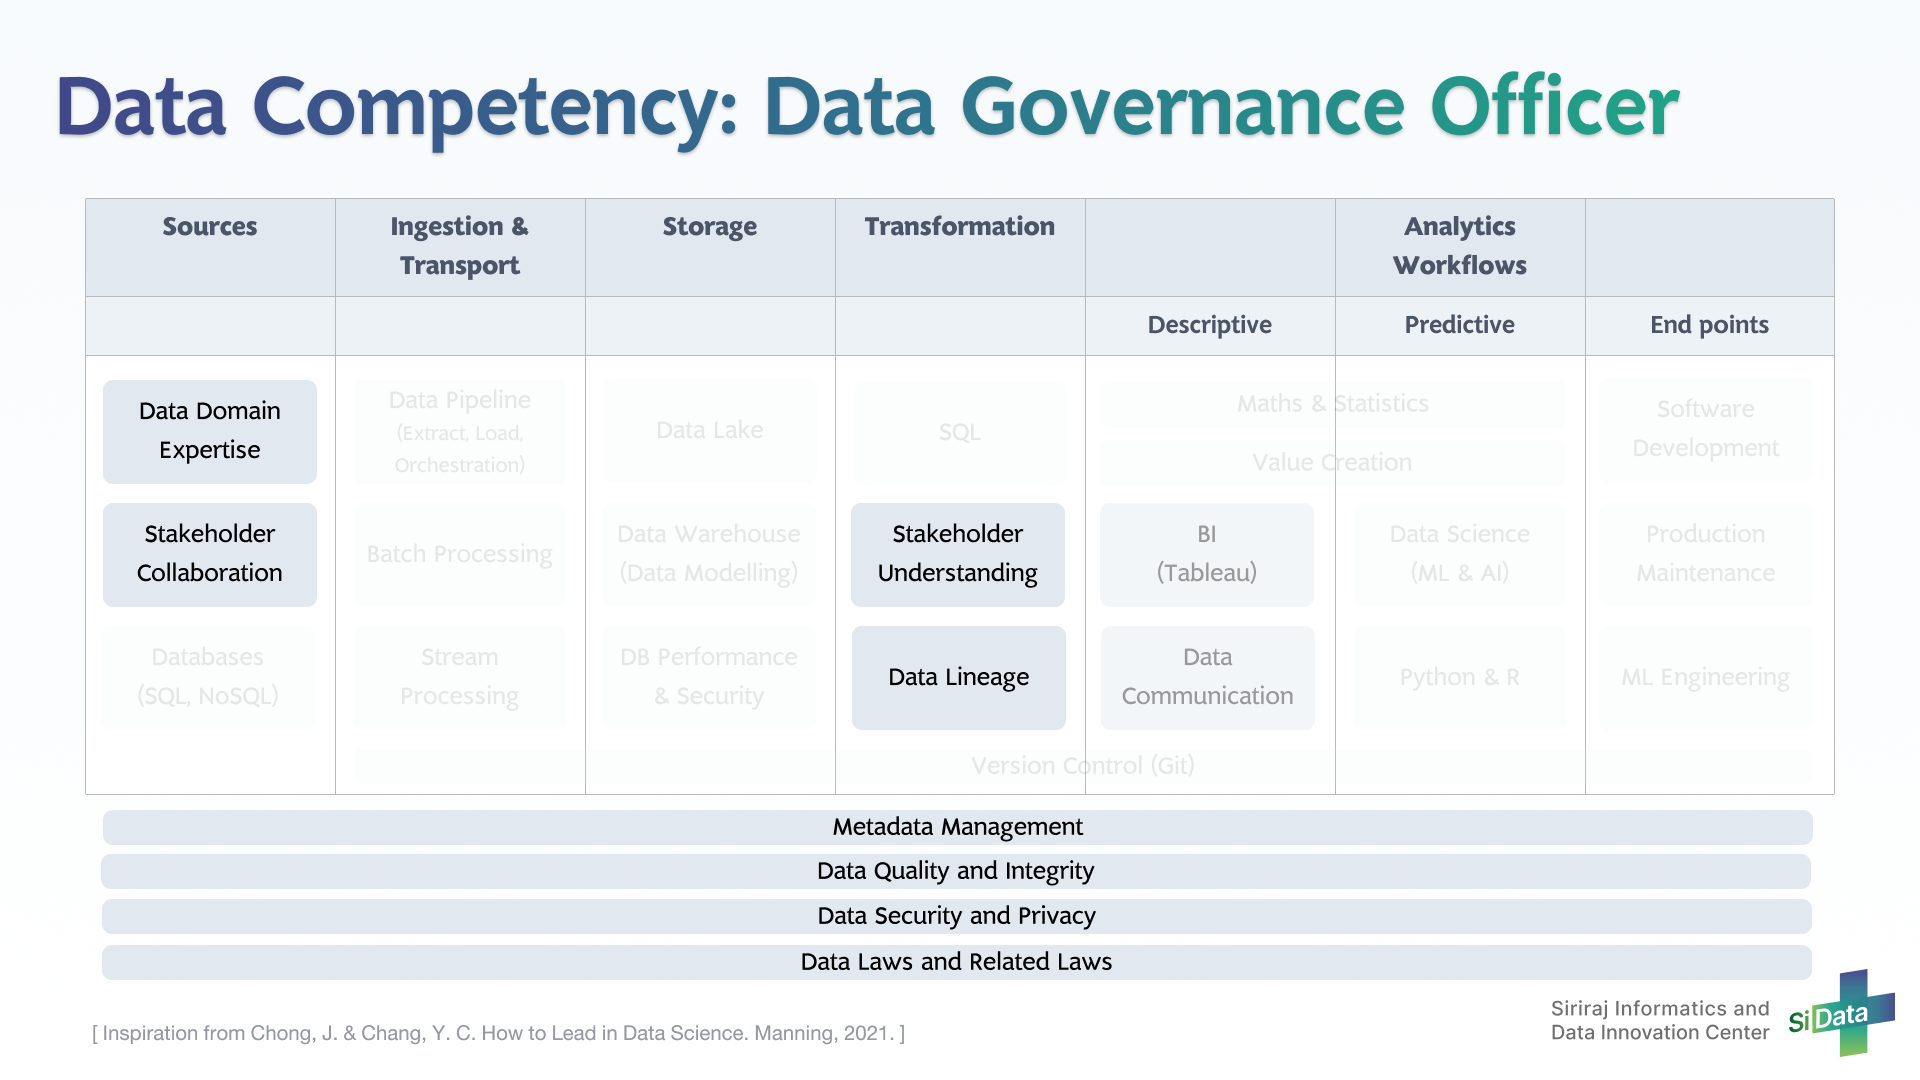 Data Competency_1 Data Gov_20220425.png